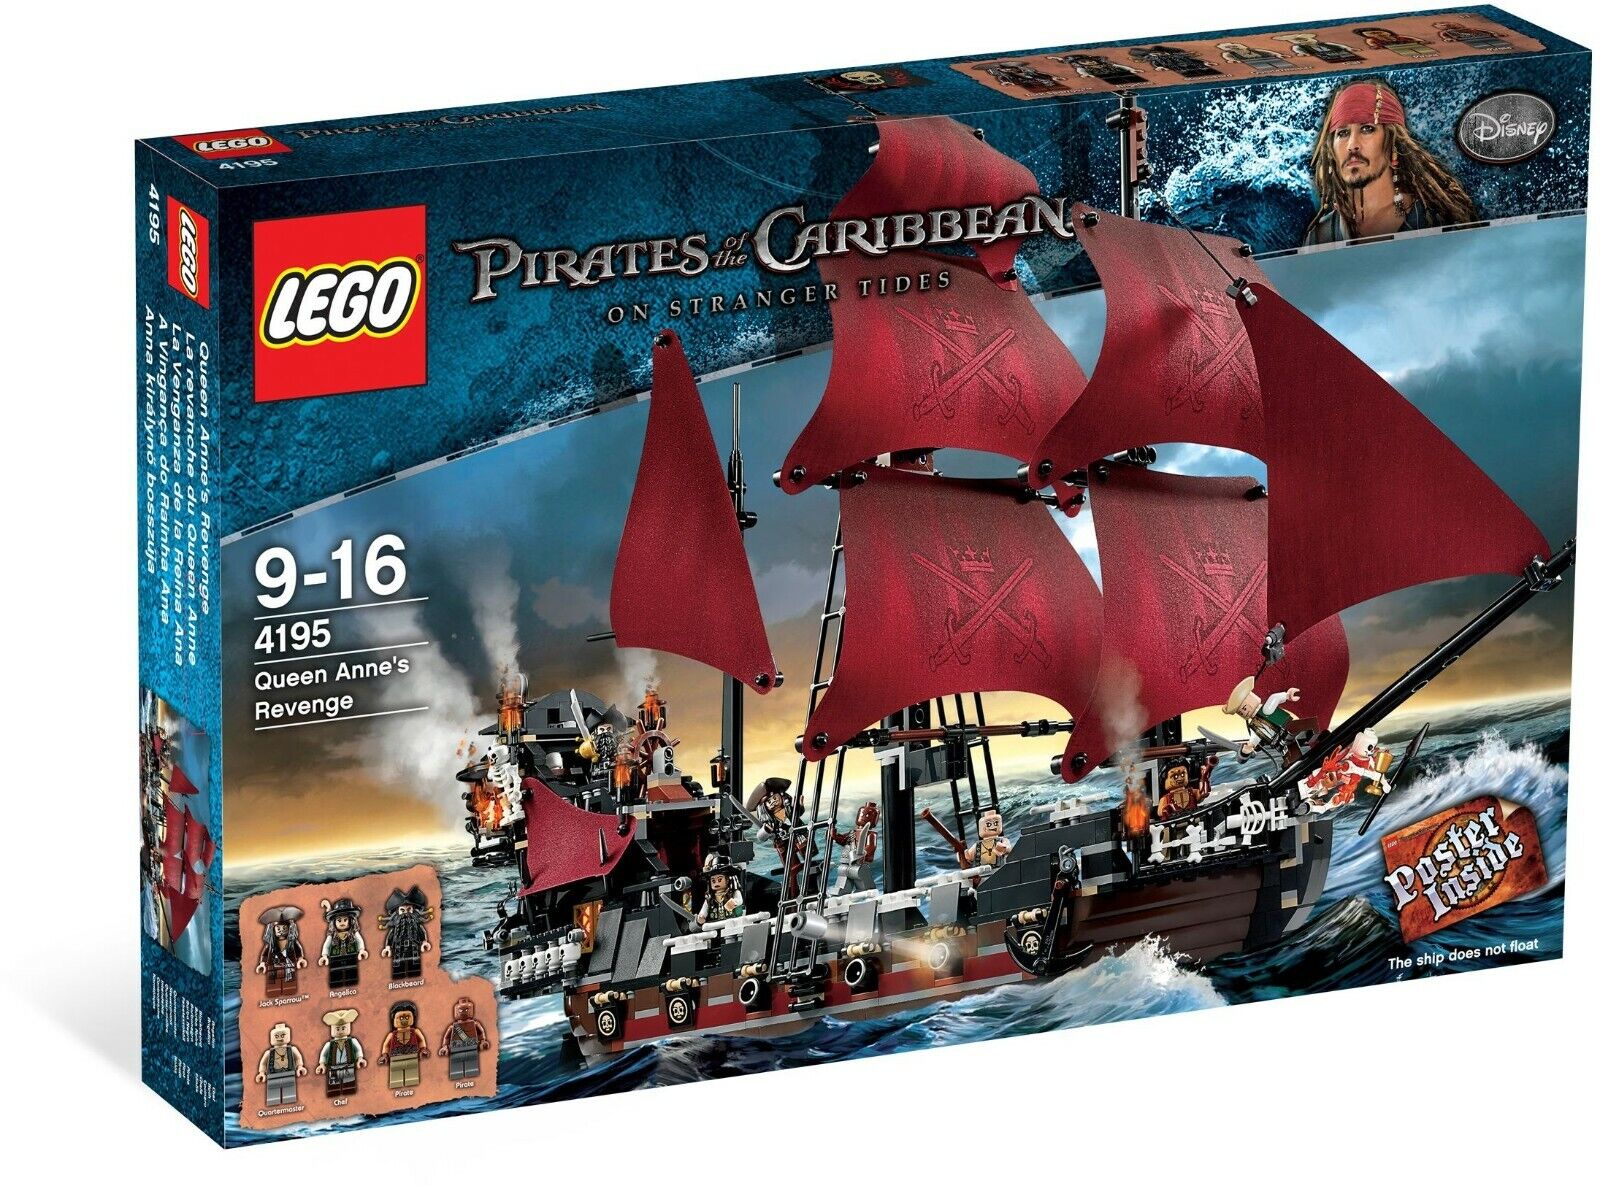 LEGO Pirates of the Caribbean Queen Anne's Revenge 4195